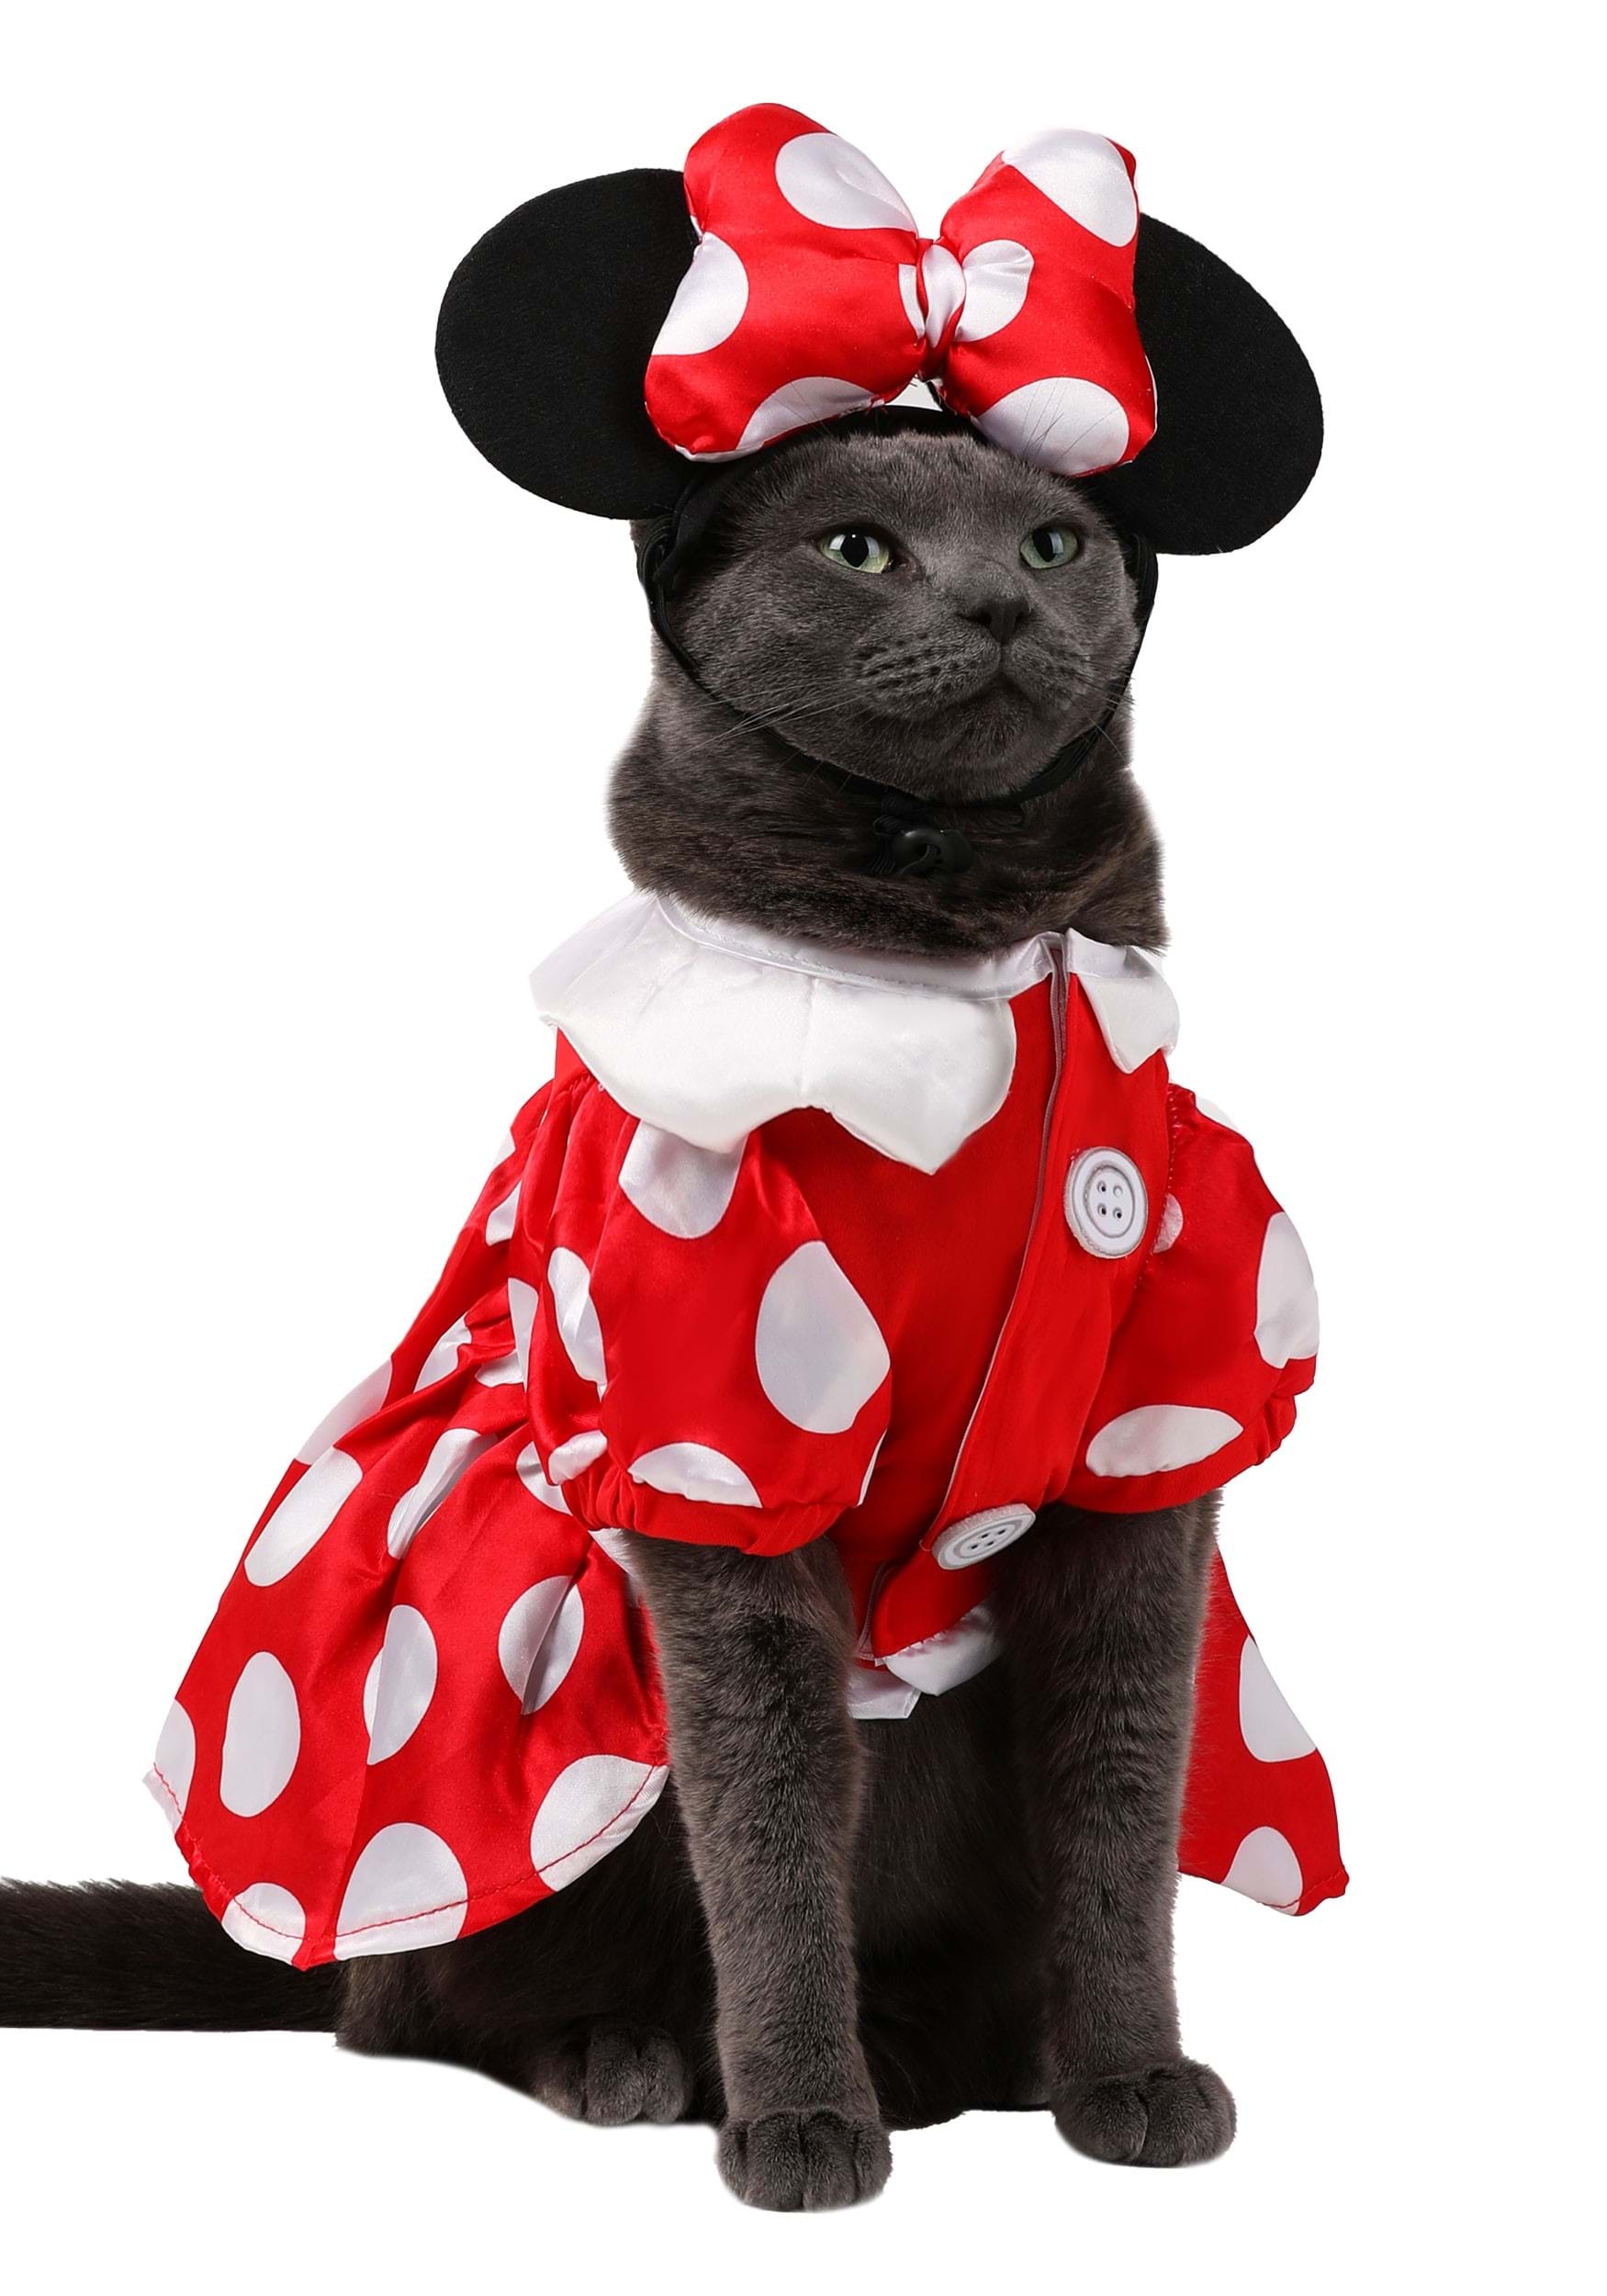 Disney Minnie Mouse Costume for Dogs